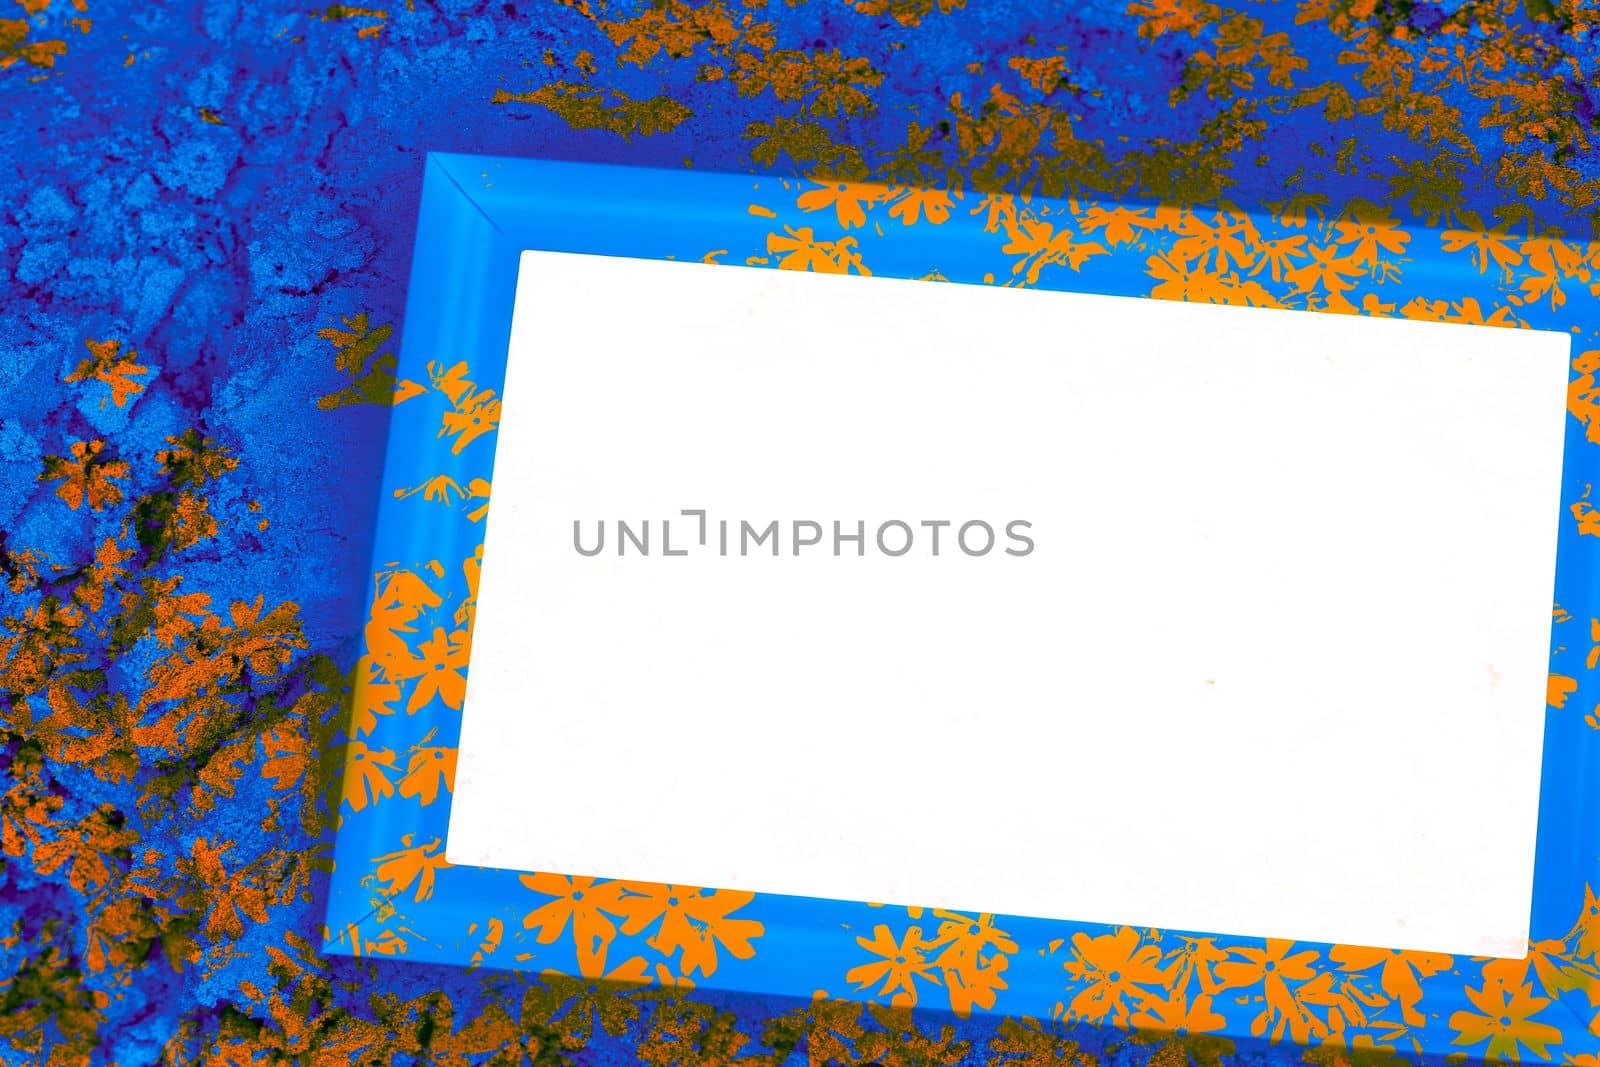 a continuous area or expanse which is free, available, or unoccupied. Abstract blue orange azure floral frame with white space for text